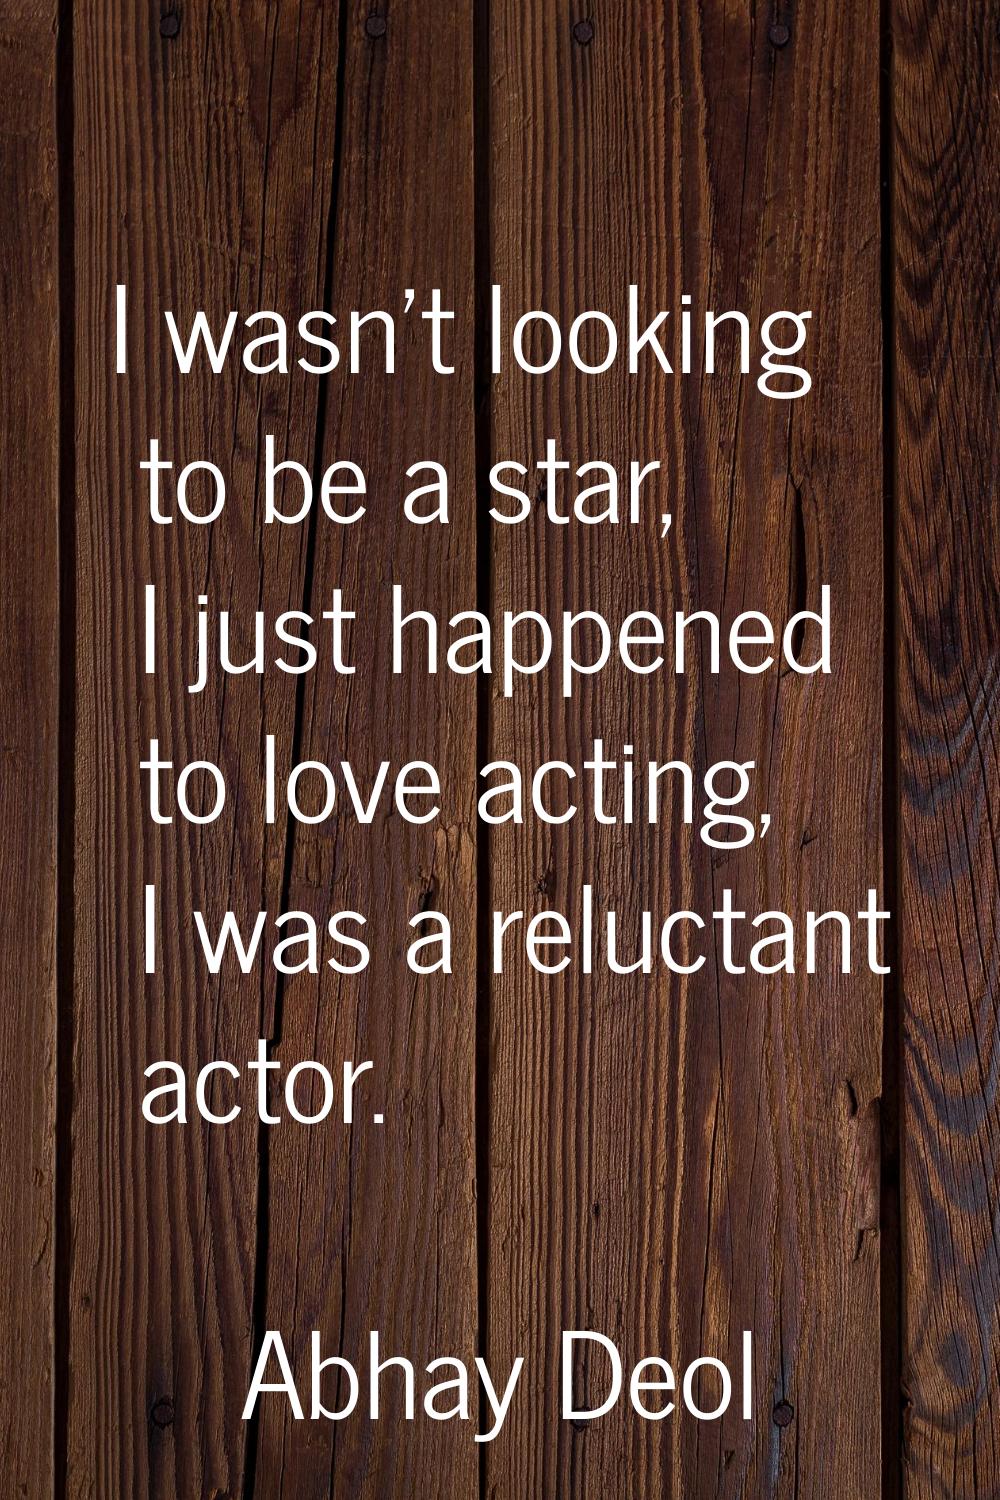 I wasn't looking to be a star, I just happened to love acting, I was a reluctant actor.